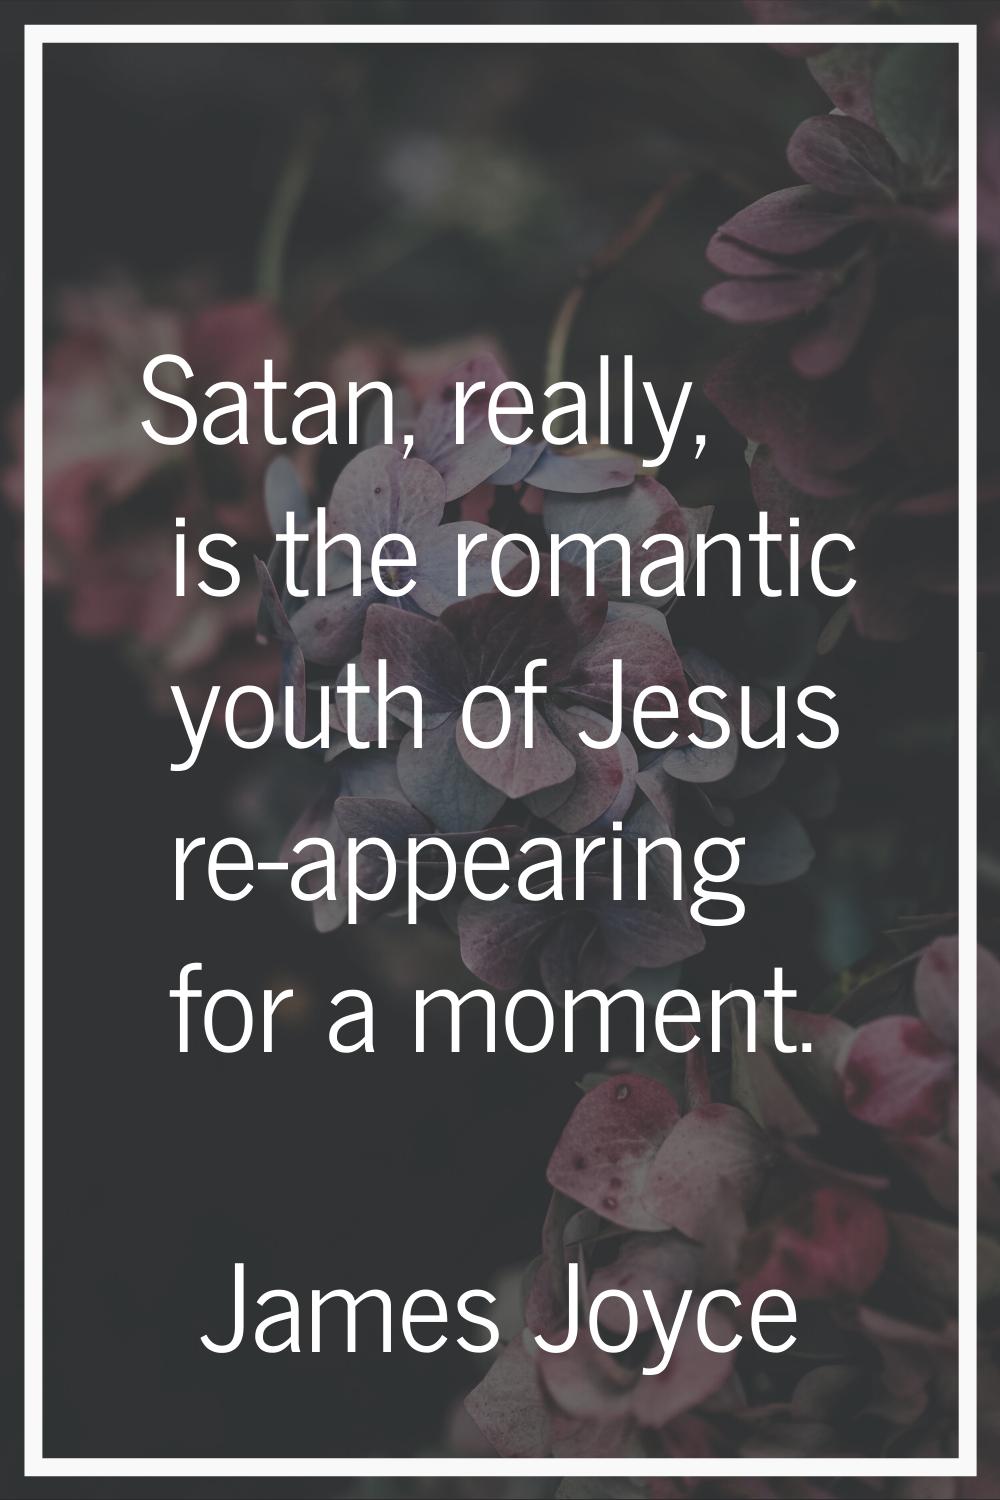 Satan, really, is the romantic youth of Jesus re-appearing for a moment.